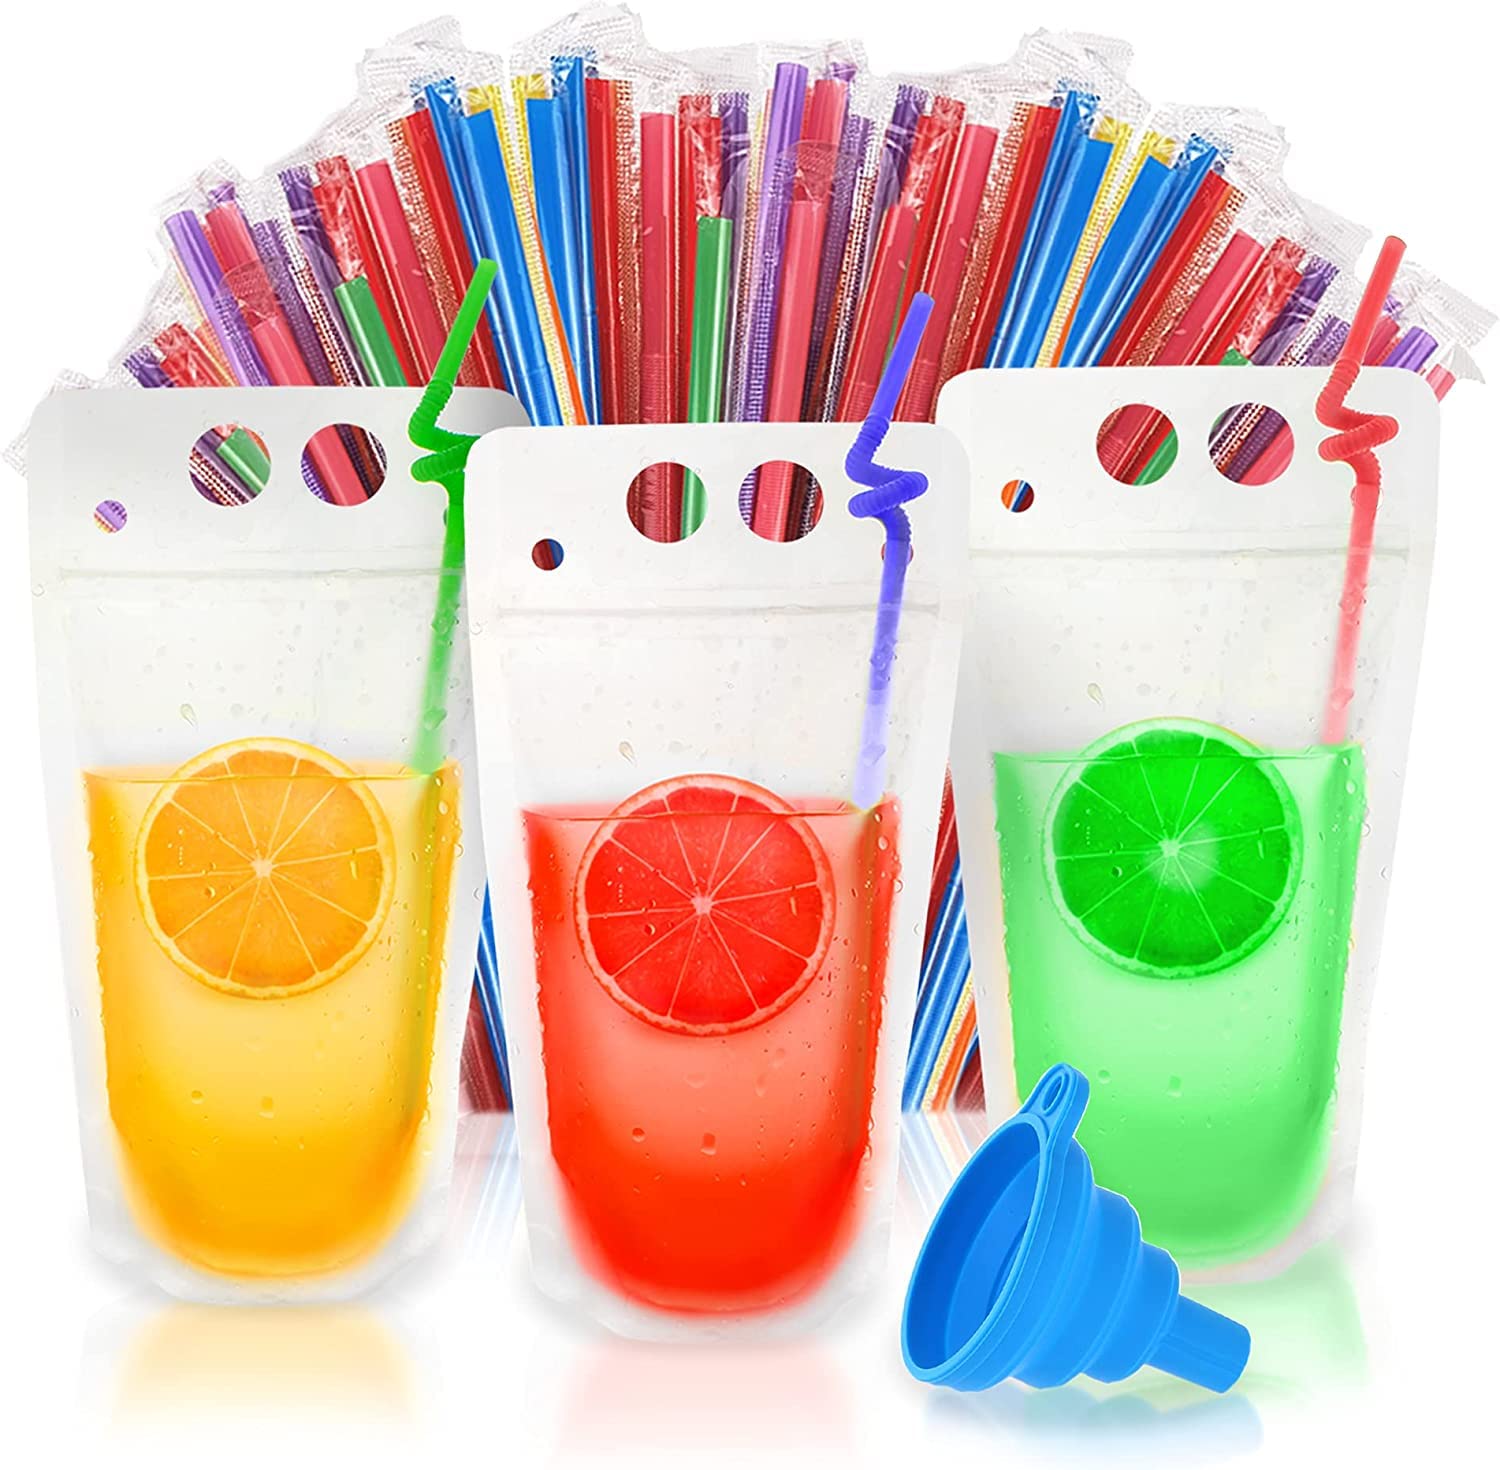 UTILE Clear 100 PCS Drink Pouches 12 oz for Adults and Kids with Individually Wrapped Straws, Reclosable Zipper Smoothie Juice pouches – Hand Held Translucent Bag Funnel Included